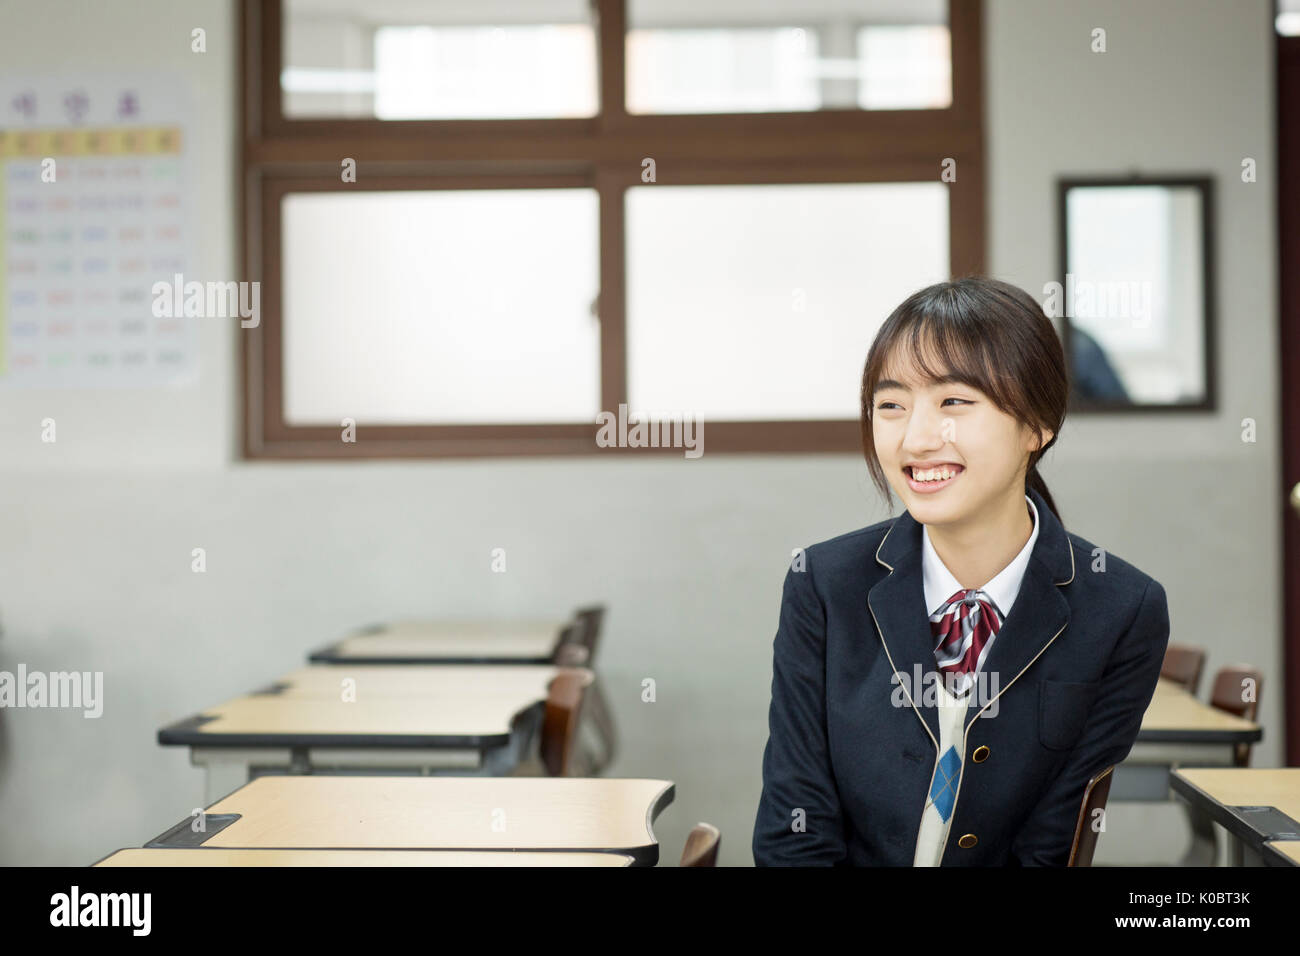 Portrait of smiling school girl in classroom Banque D'Images